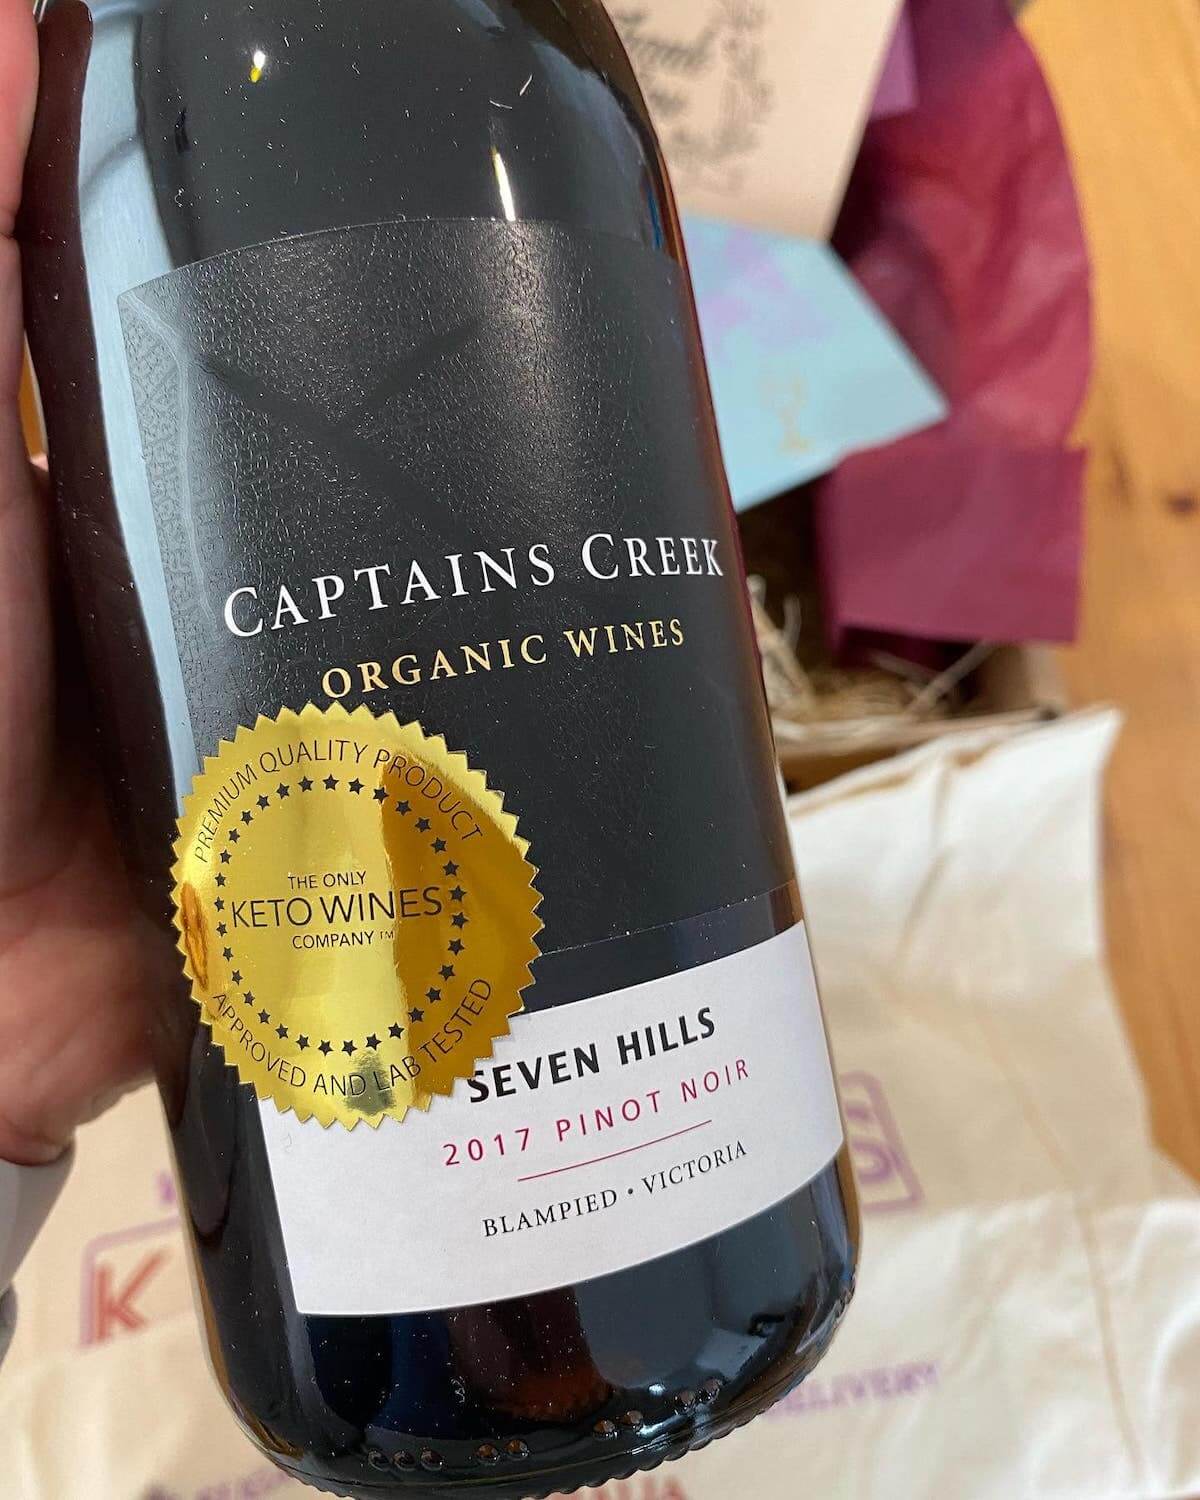 Captains Creek 2017 Seven Hills Pinot Noir – The Only Keto Wines Co